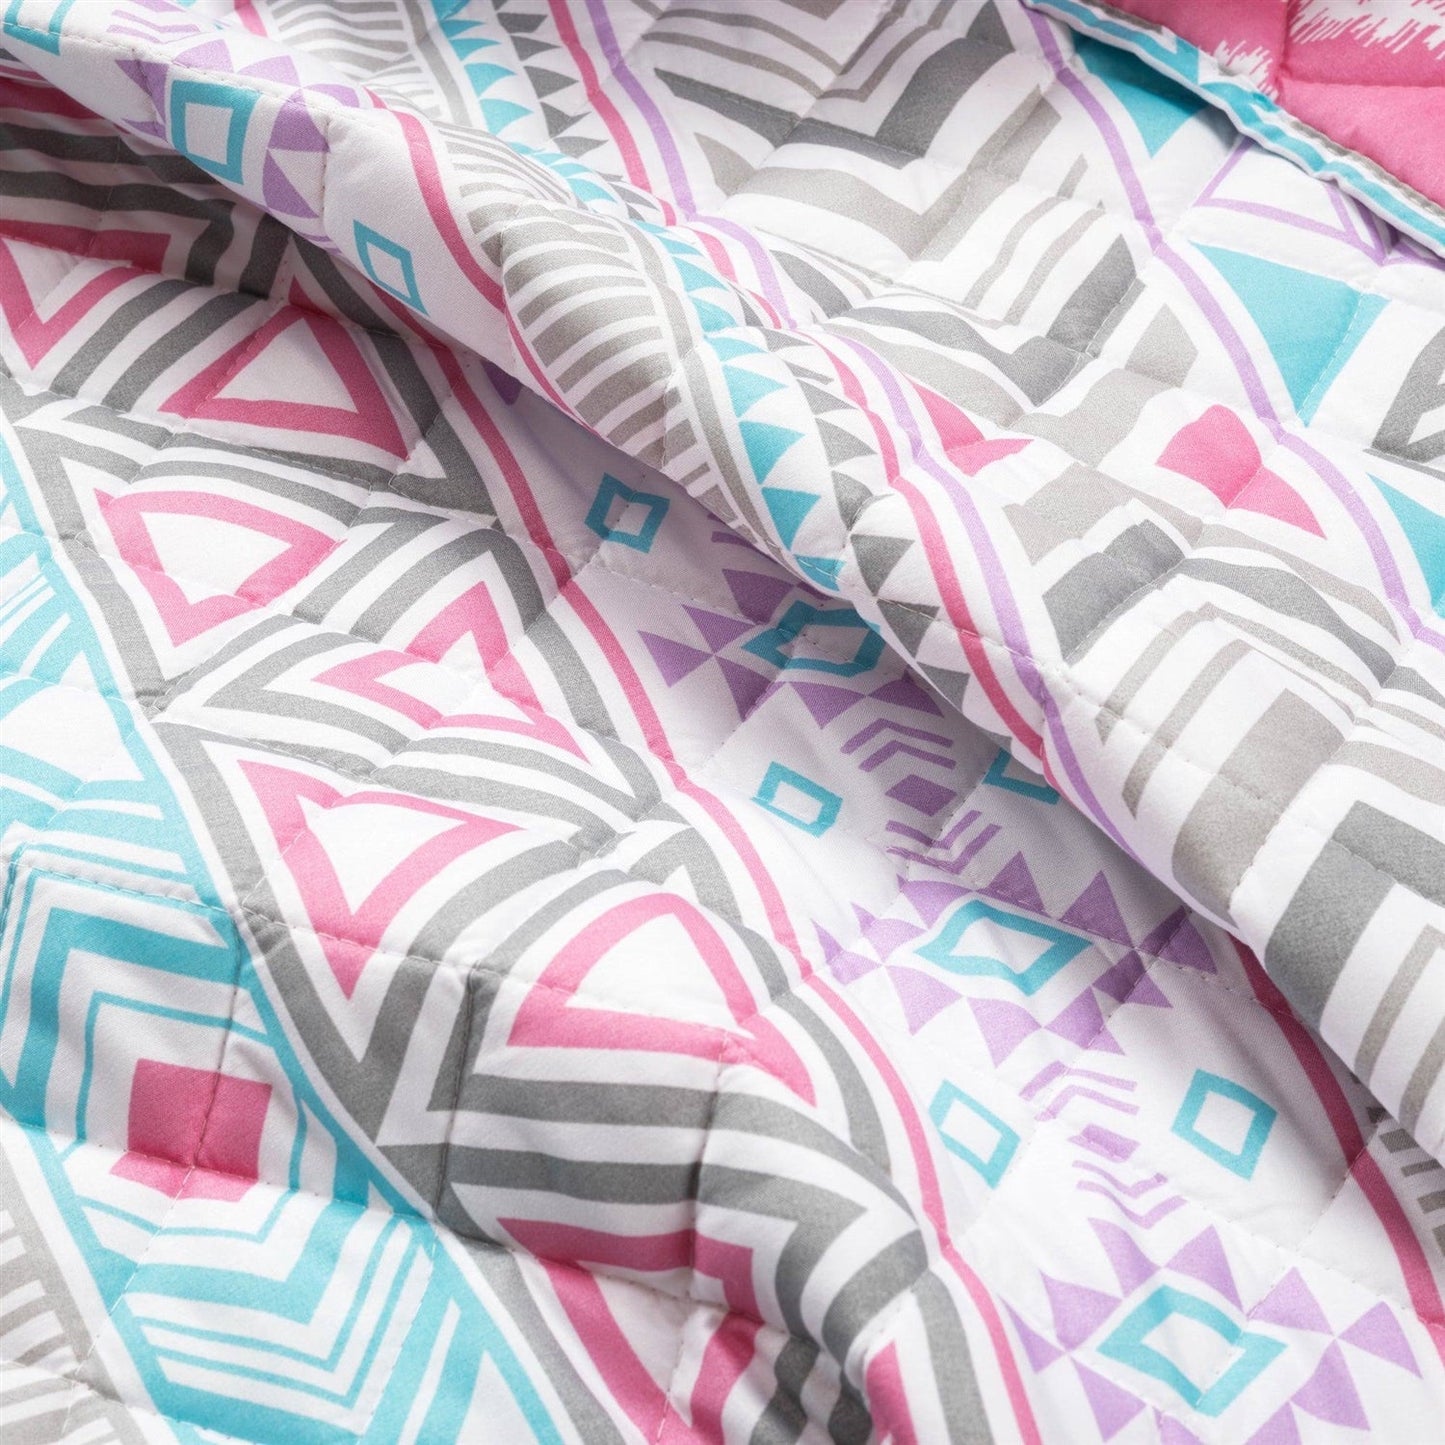 Bedroom > Quilts & Blankets - Full/Queen Southwest Style Polyester Pink Blue Striped Reversible Quilt Set